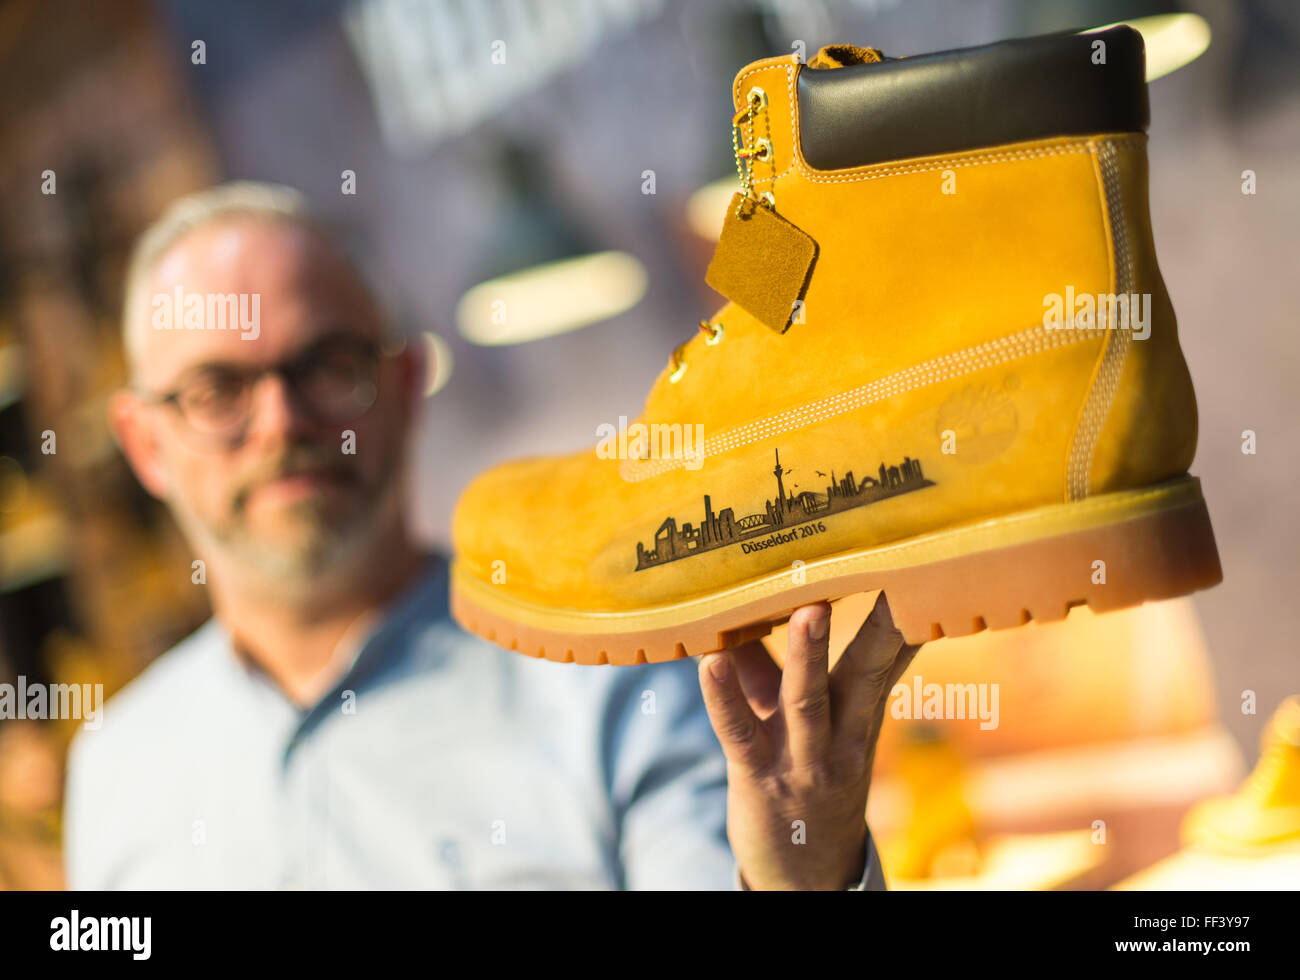 Timberland shoes hi-res stock photography and images - Page 2 - Alamy